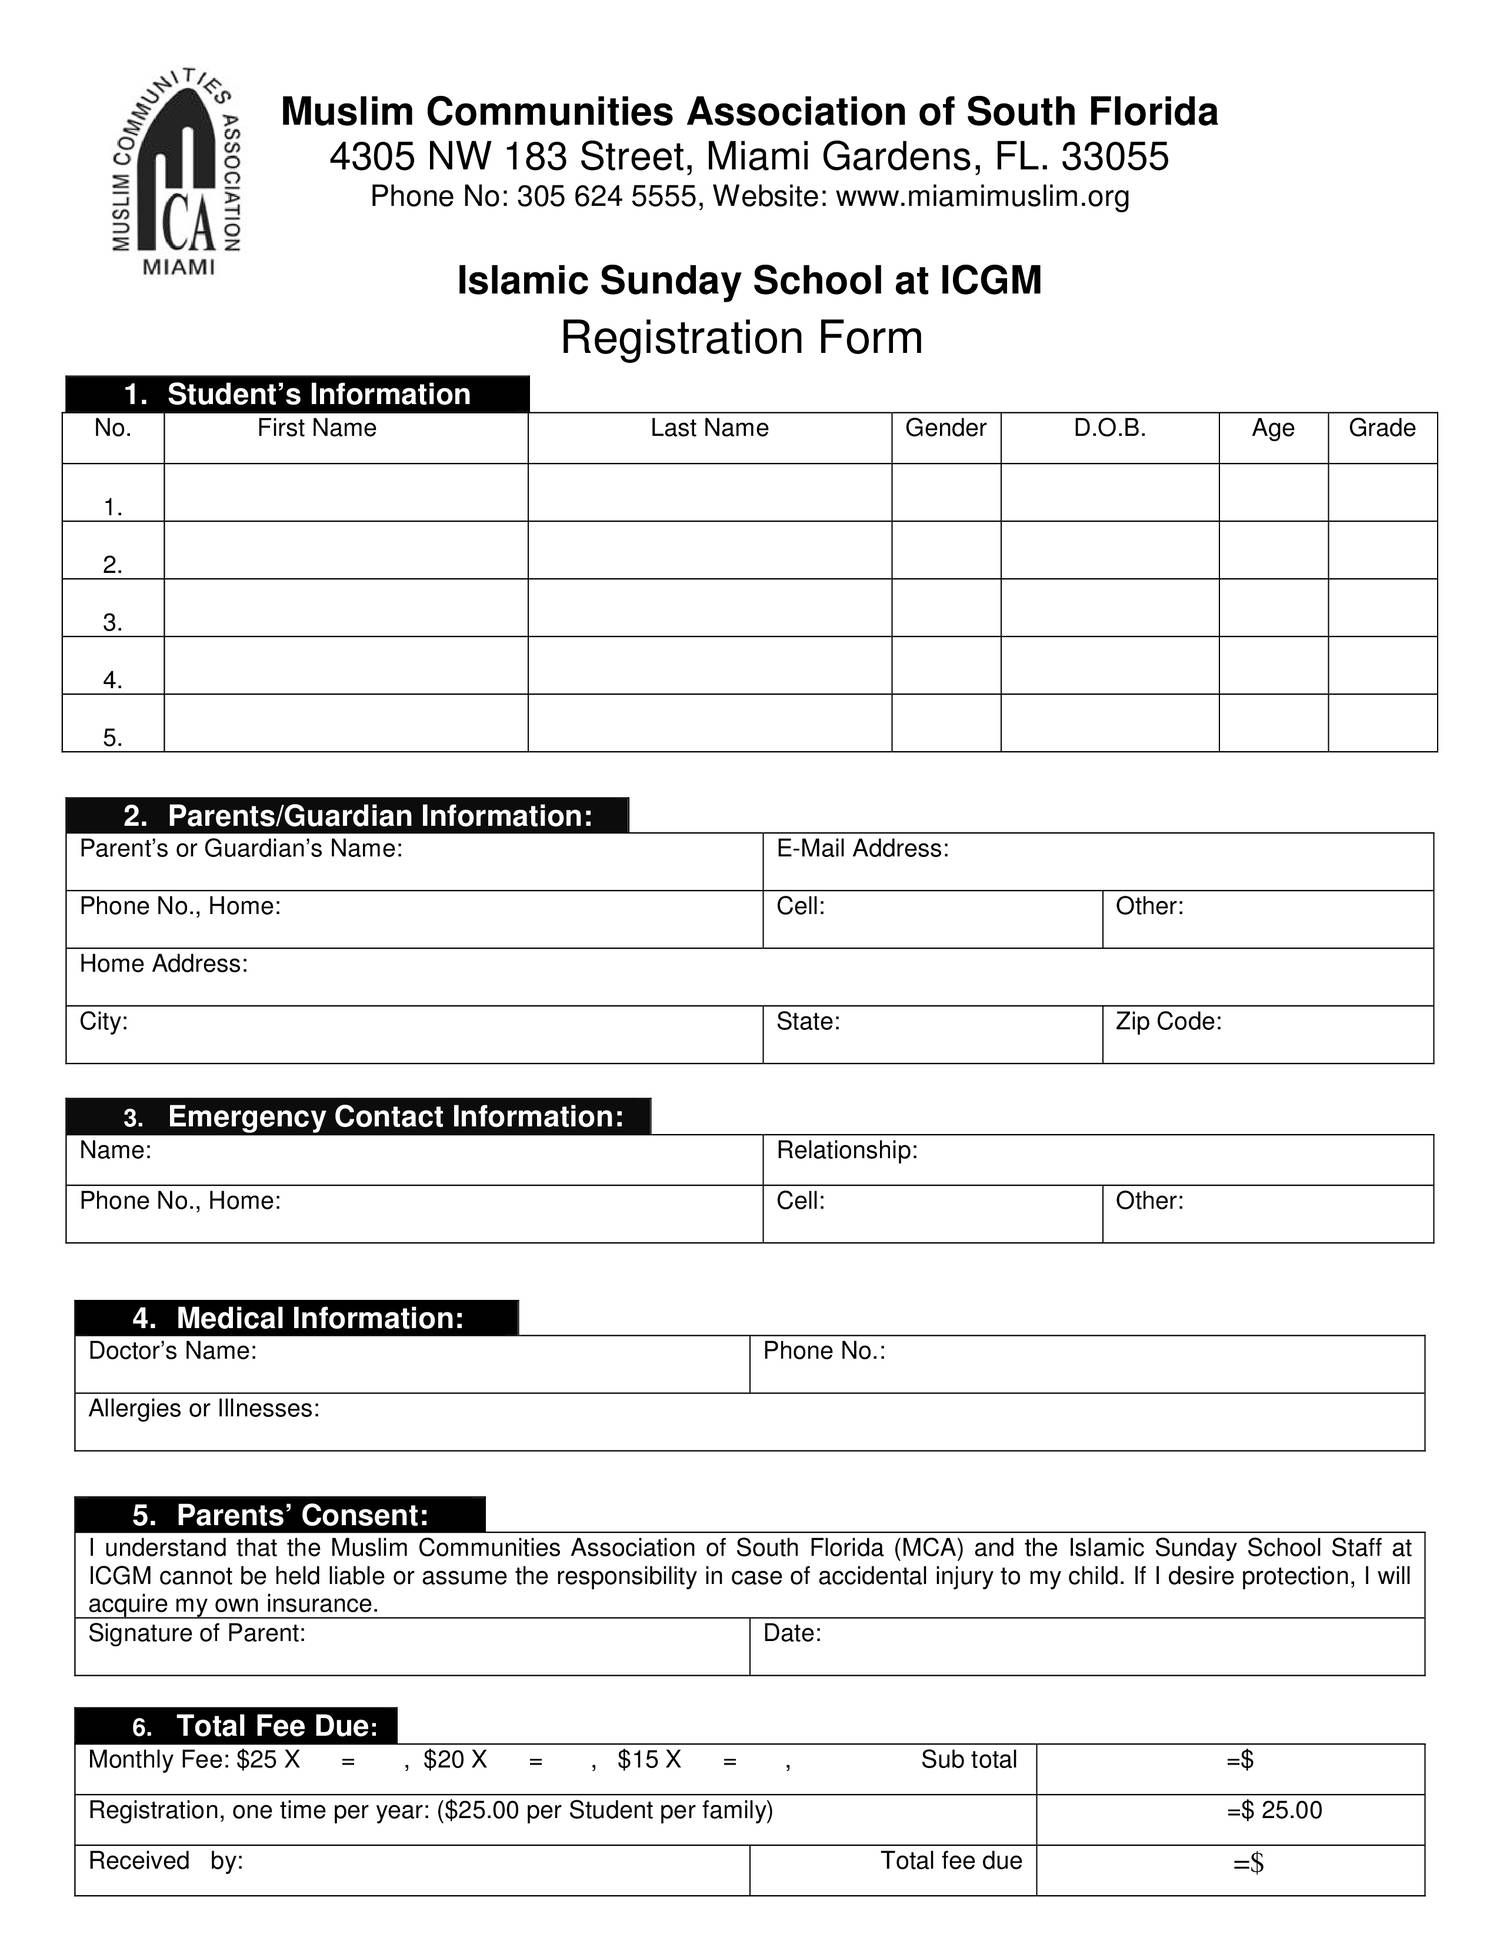 Sunday School Registration Form Template Word Fill Ou vrogue.co